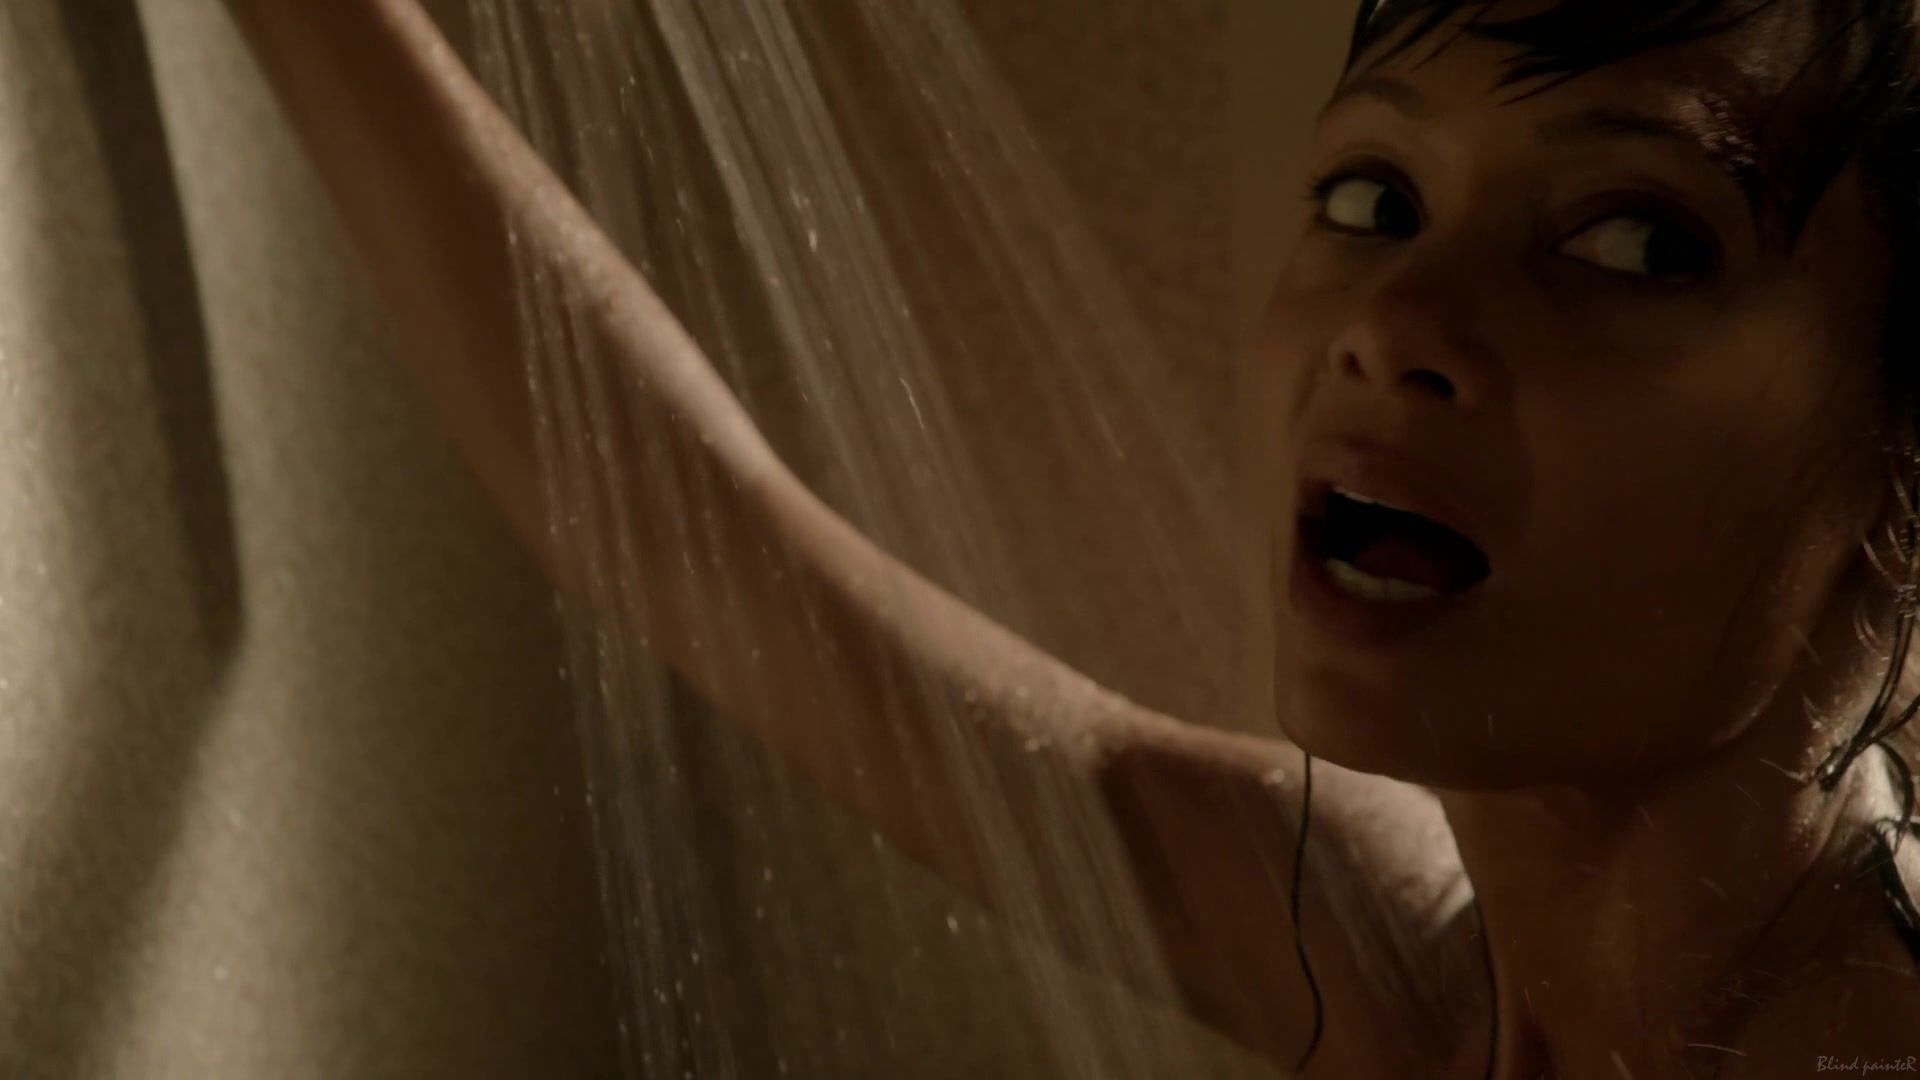 Young Tits Sex video Thandie Newton nude - Rogue S01E06-07 (2013) Girlsfucking - 2